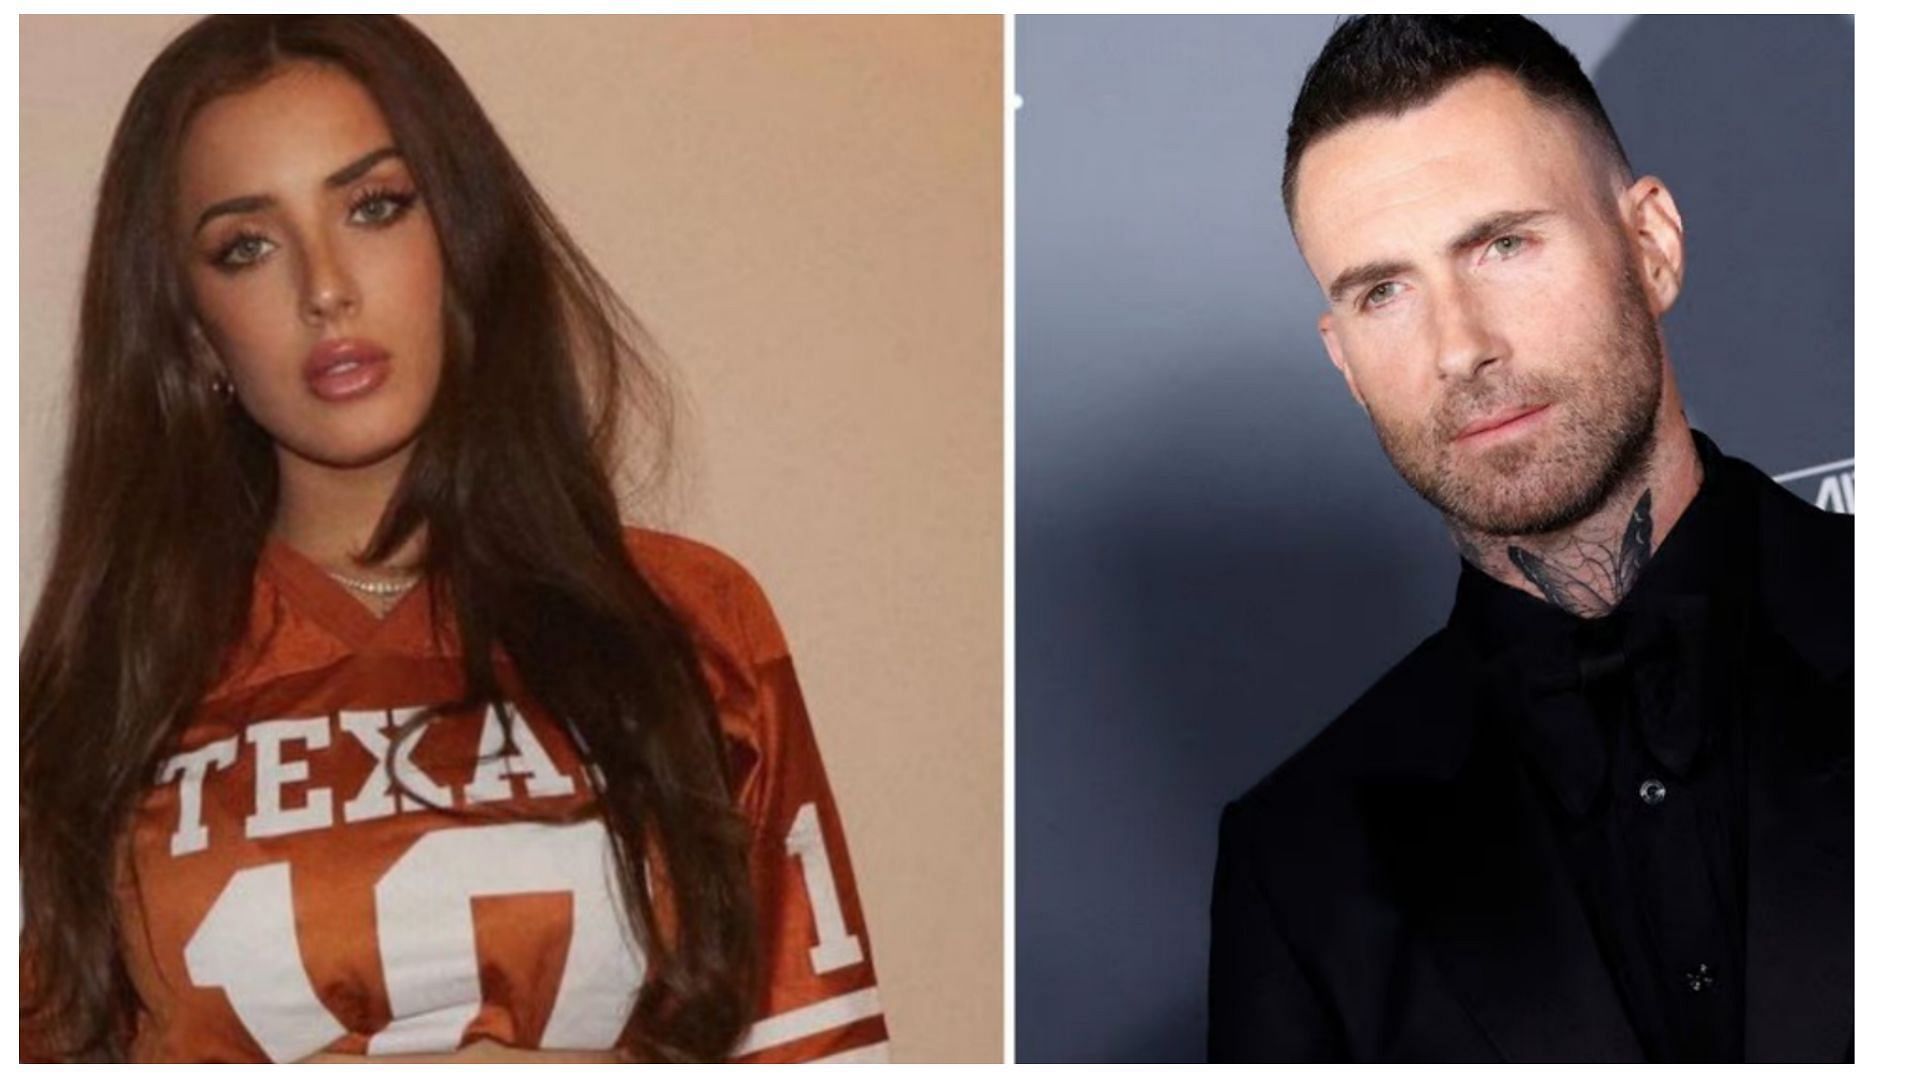 Instagram model Sumner Stroh shares a video claiming she had a year-long affair with Adam Levine (image via Instagram/Sumner Stroh and Getty Images/TNS)